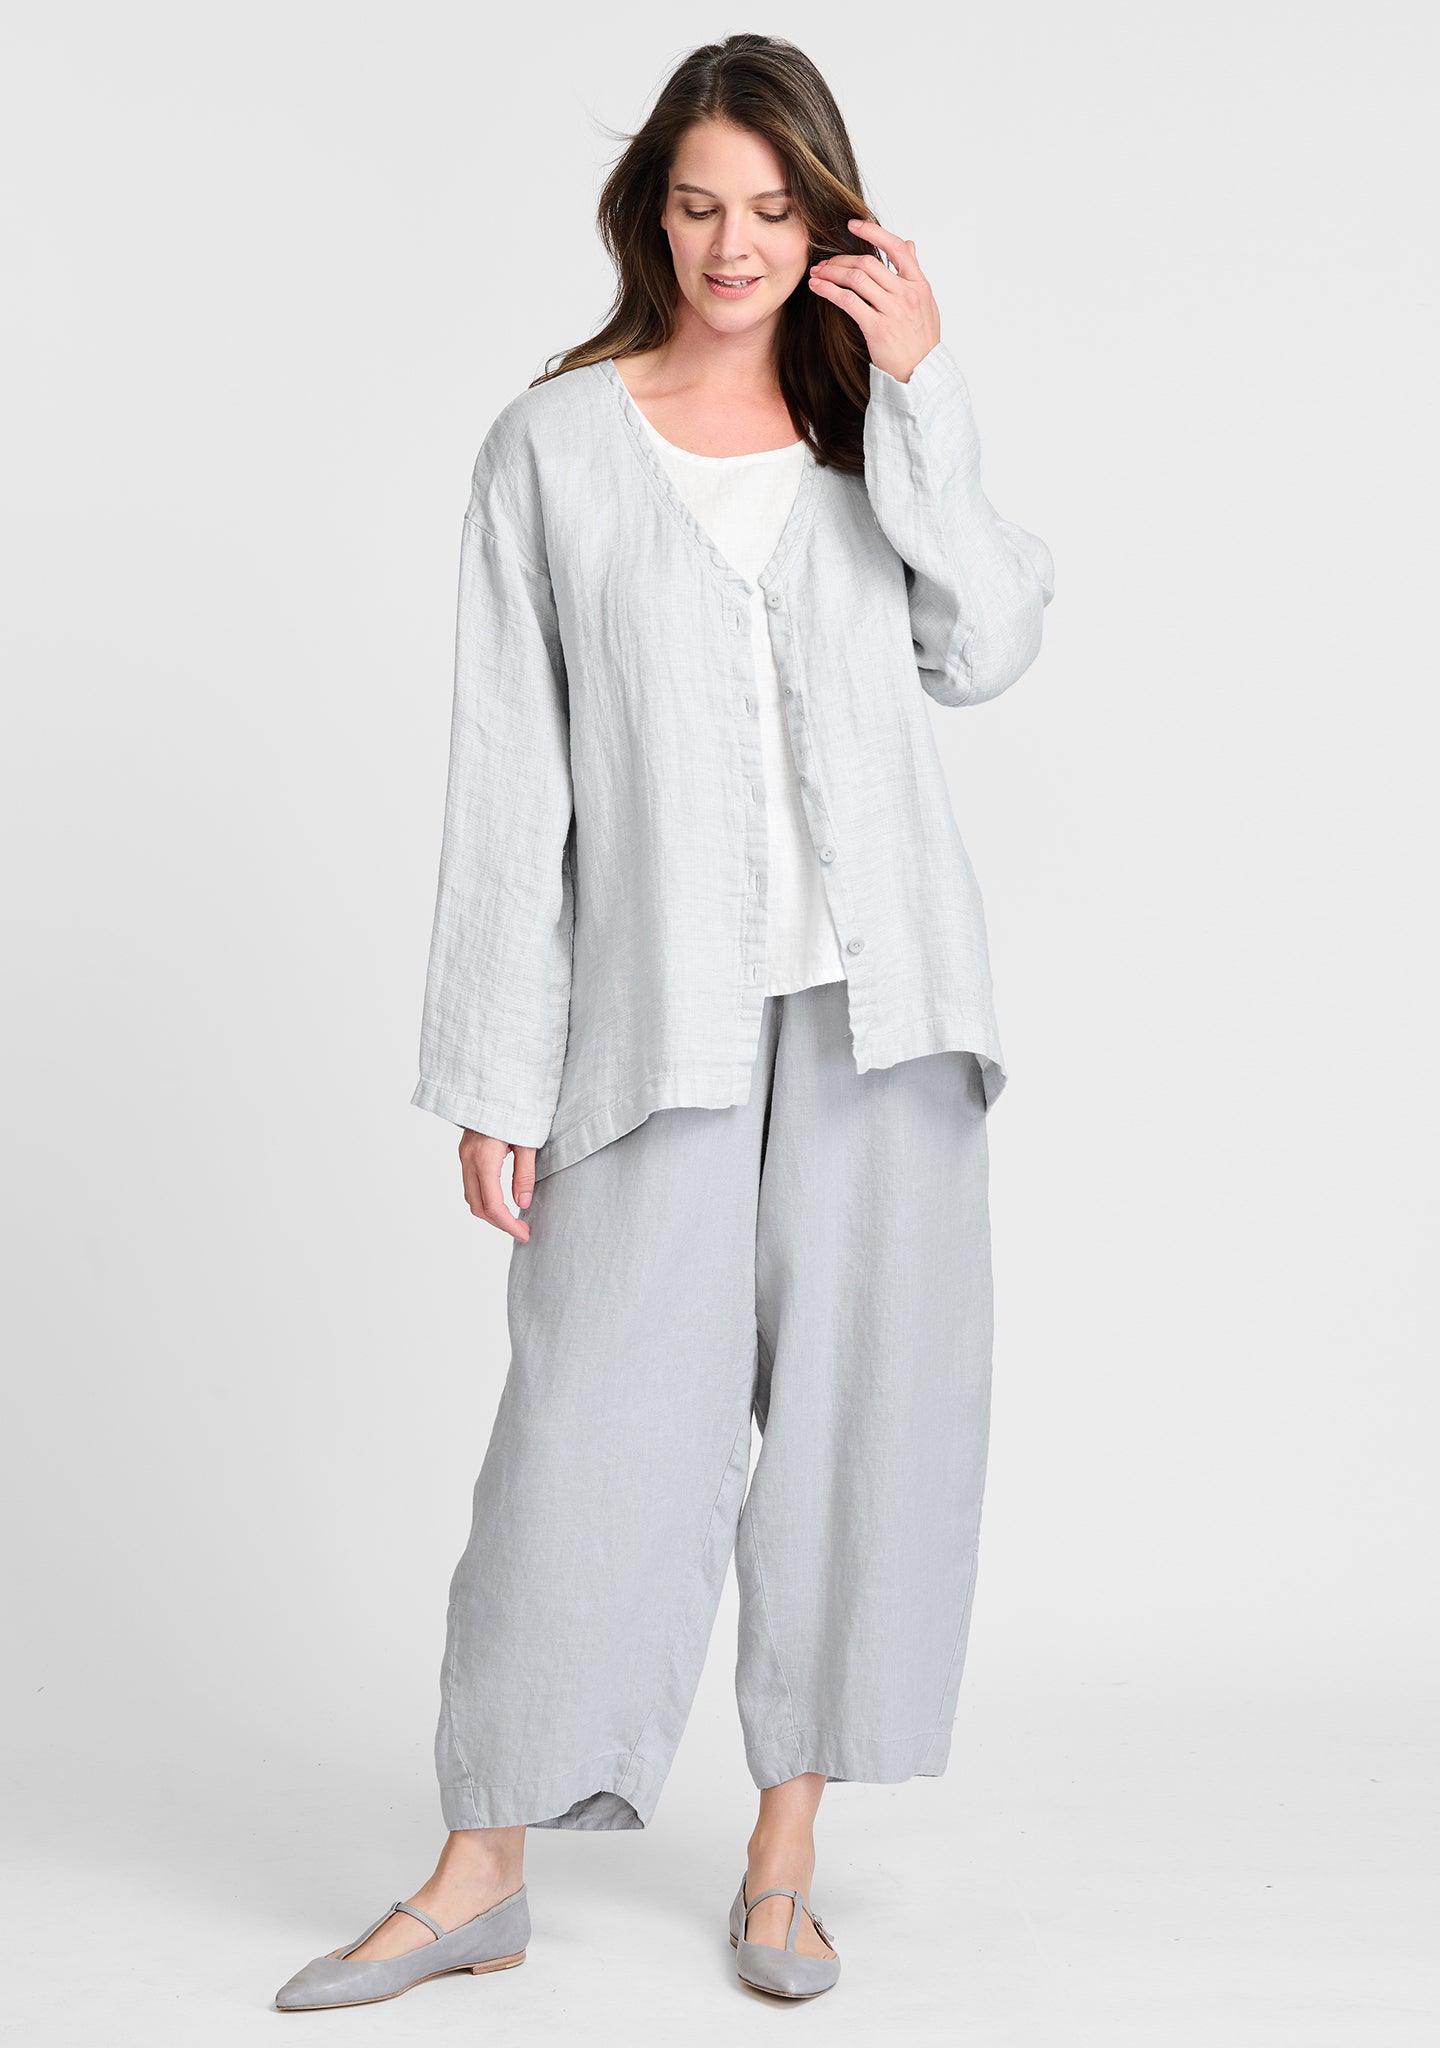 FLAX linen jacket in grey with linen tank in white and linen pants in grey